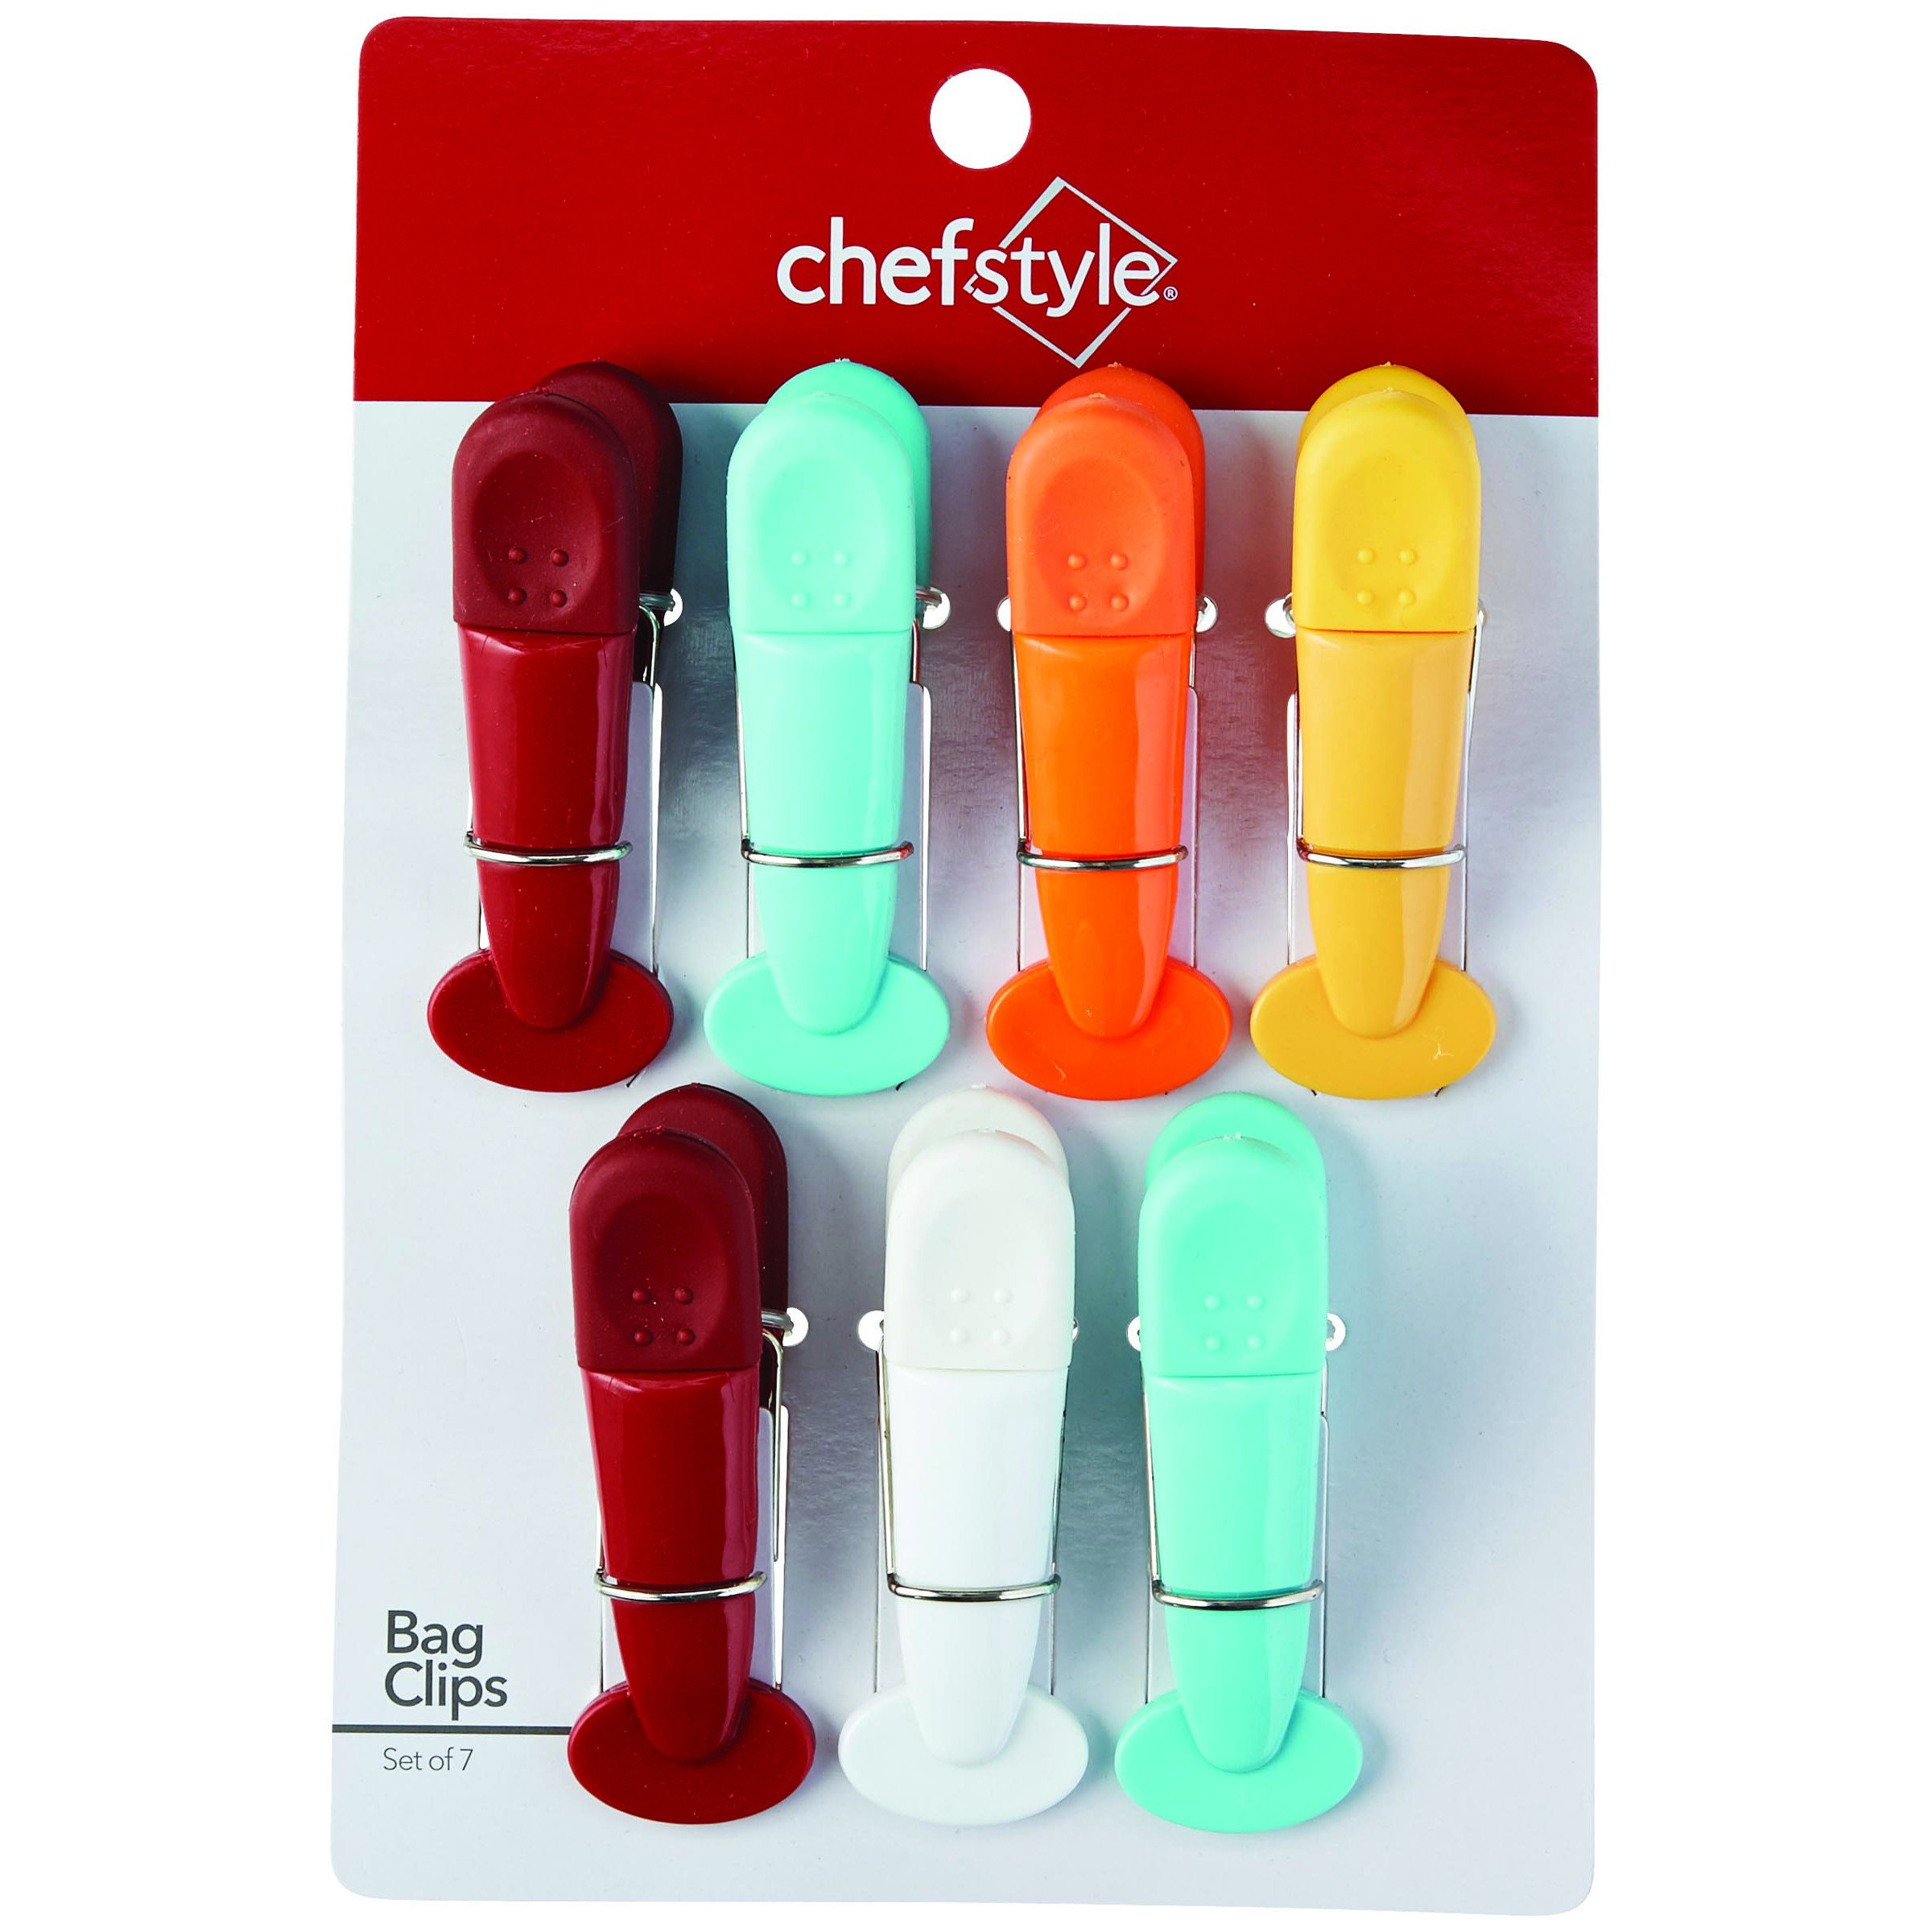 OXO Softworks Clip Set (7 ct)